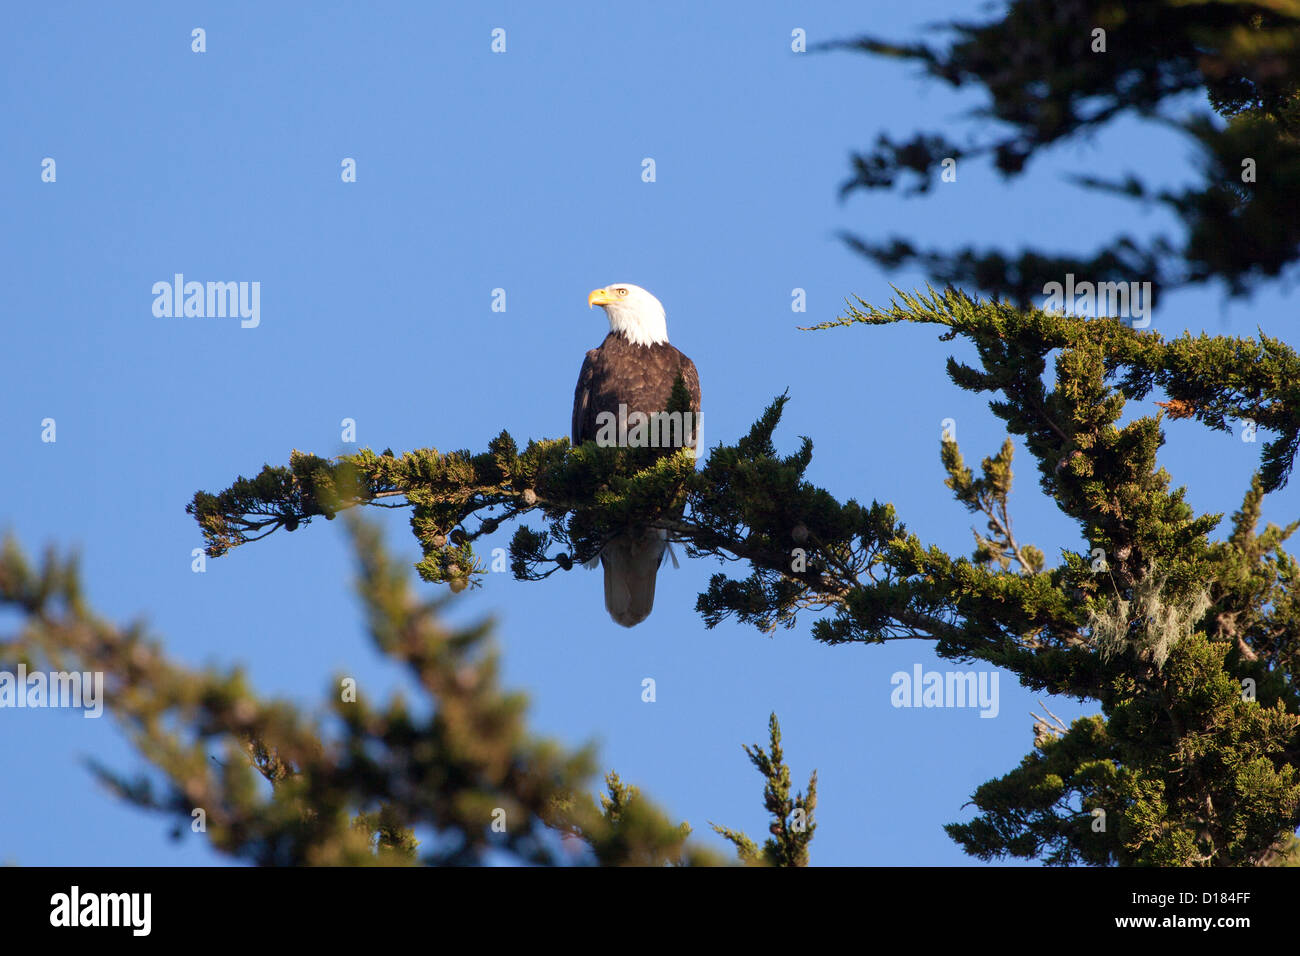 A bald eagle rests in a tree near the Russian River on the northern coast of California. Stock Photo